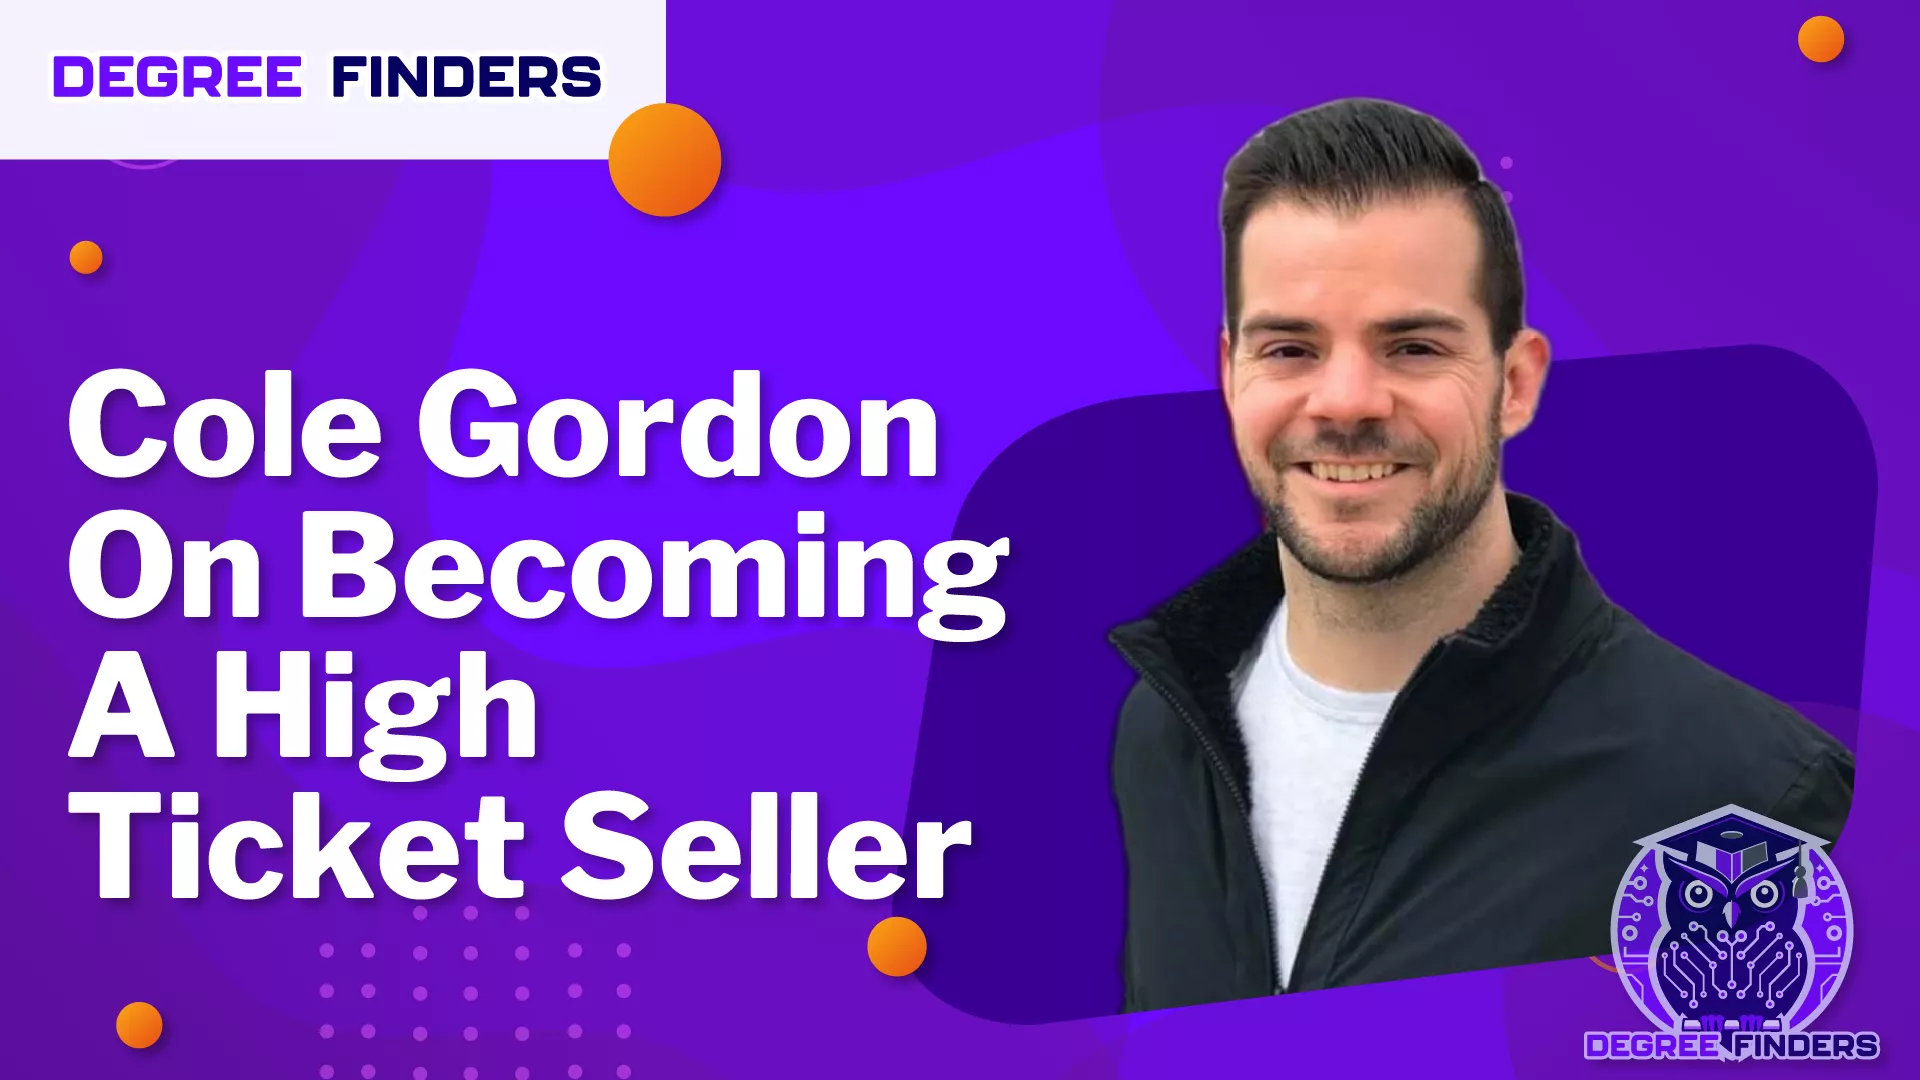 Cole Gordon On Becoming A High Ticket Seller